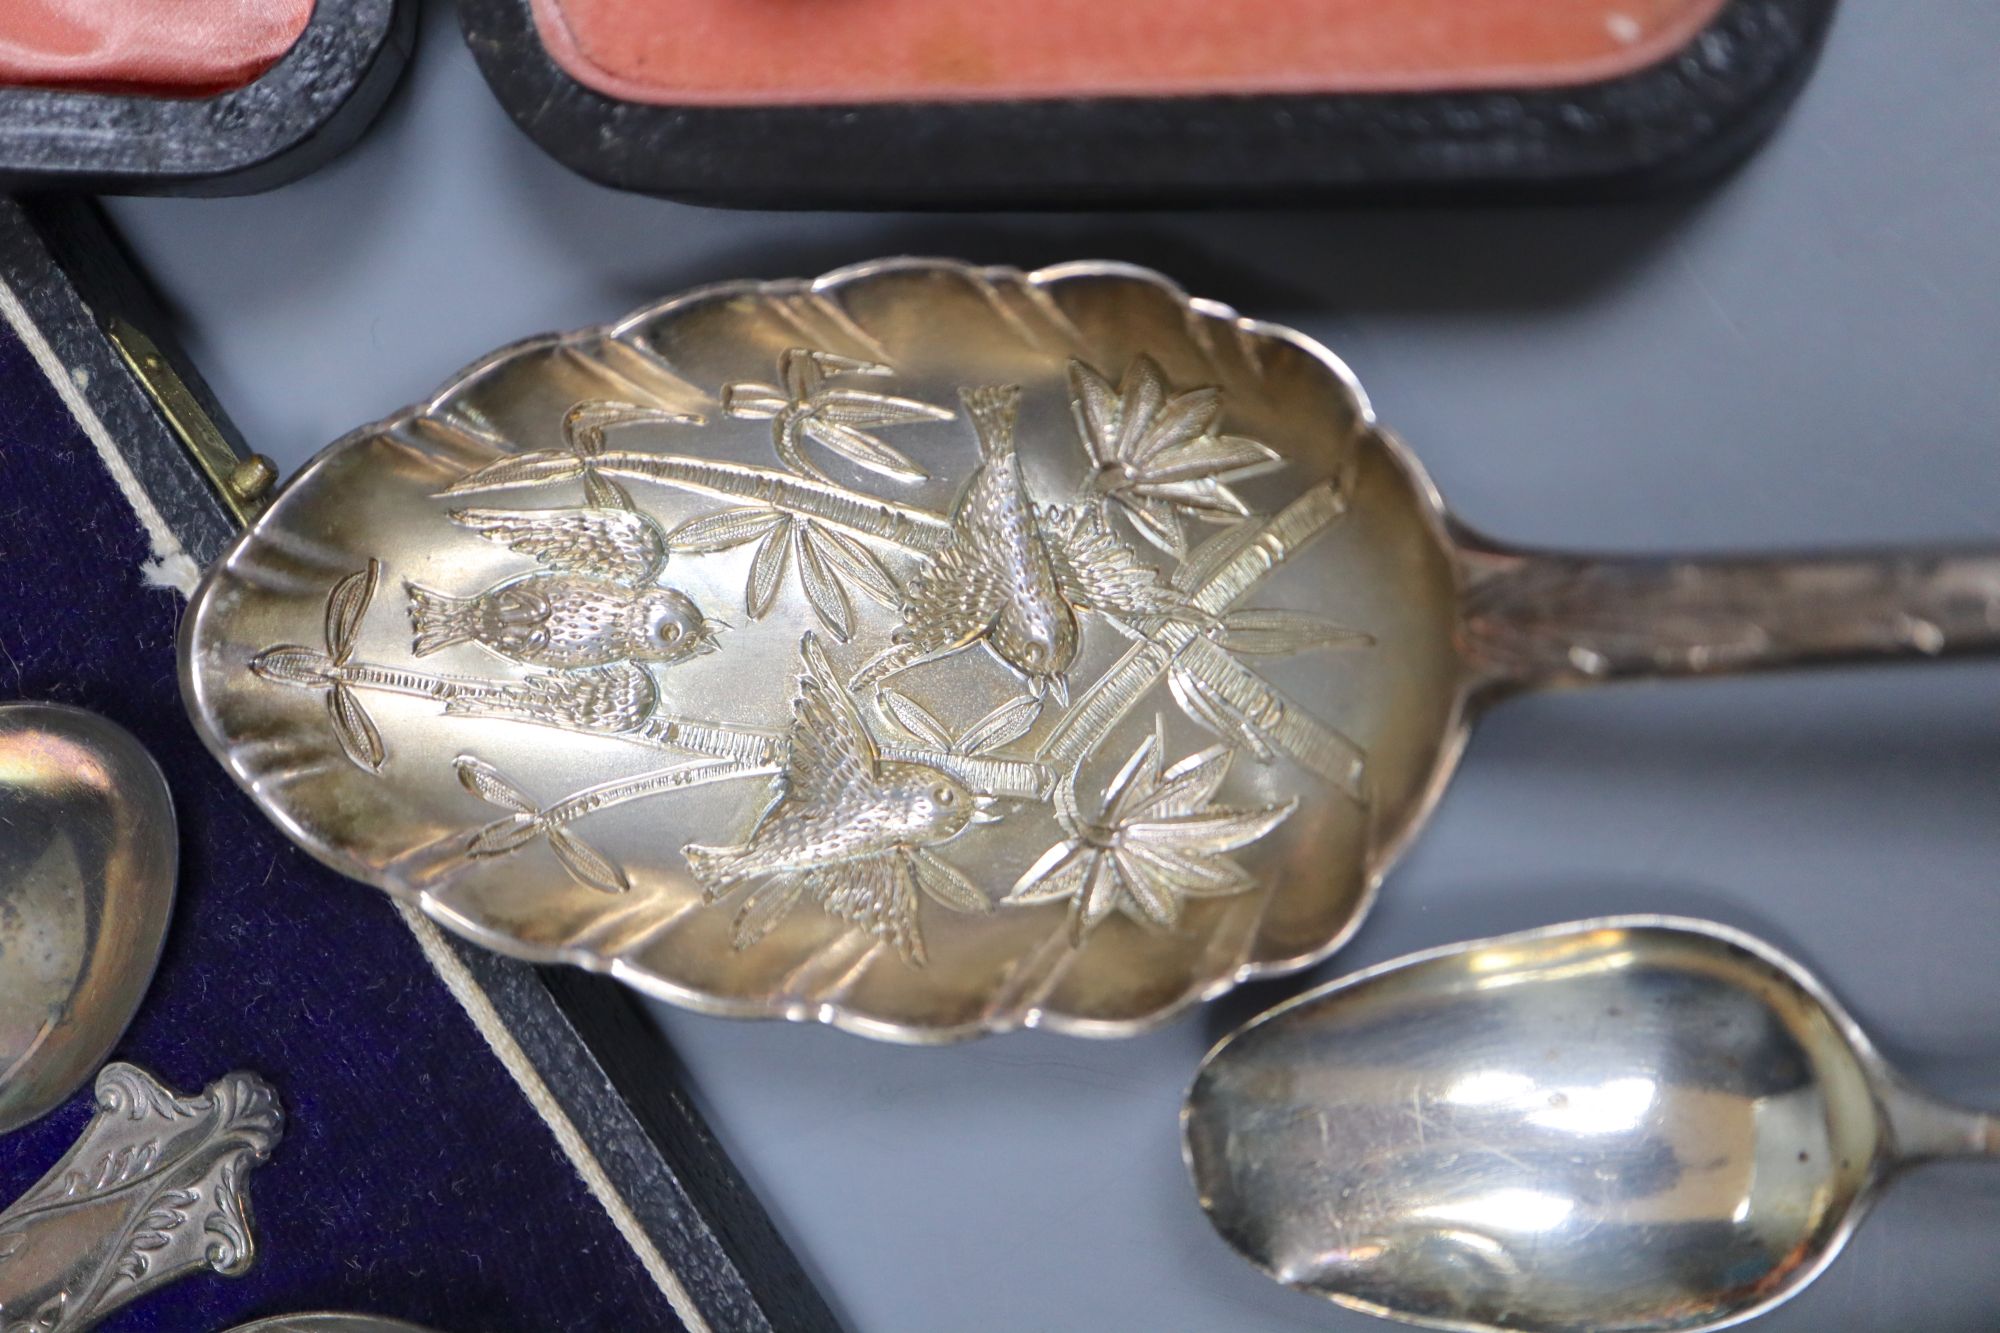 Small silver - 2 berry spoons, butter knife, ladle, feeder, christening spoon and fork. Two cased sets, tongs and a silver gilt spoon